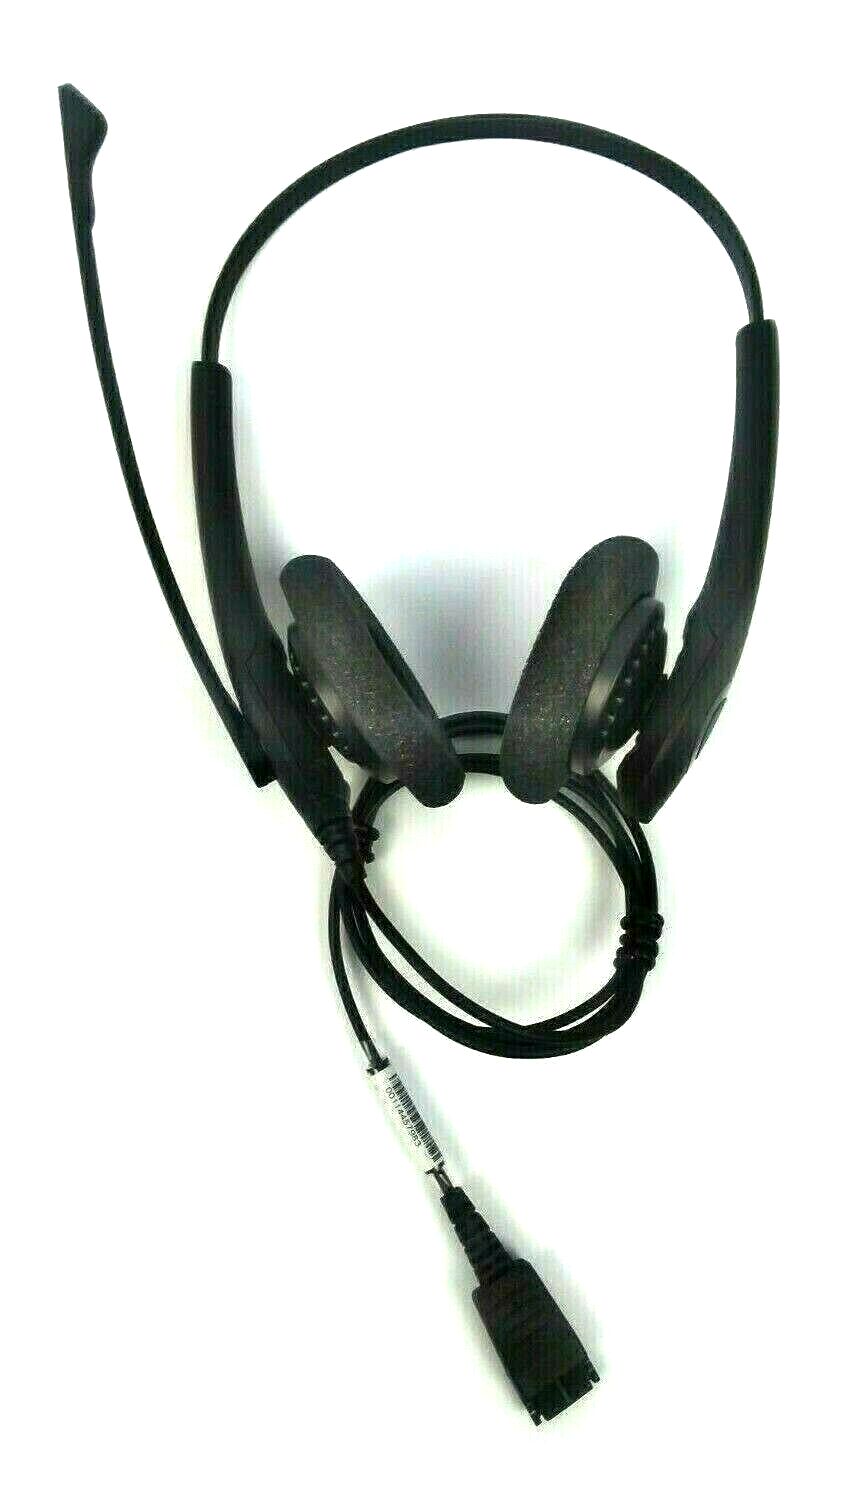 Binaural Dual Ear Headset Quick Disconnect with Boom Microphone 114457983